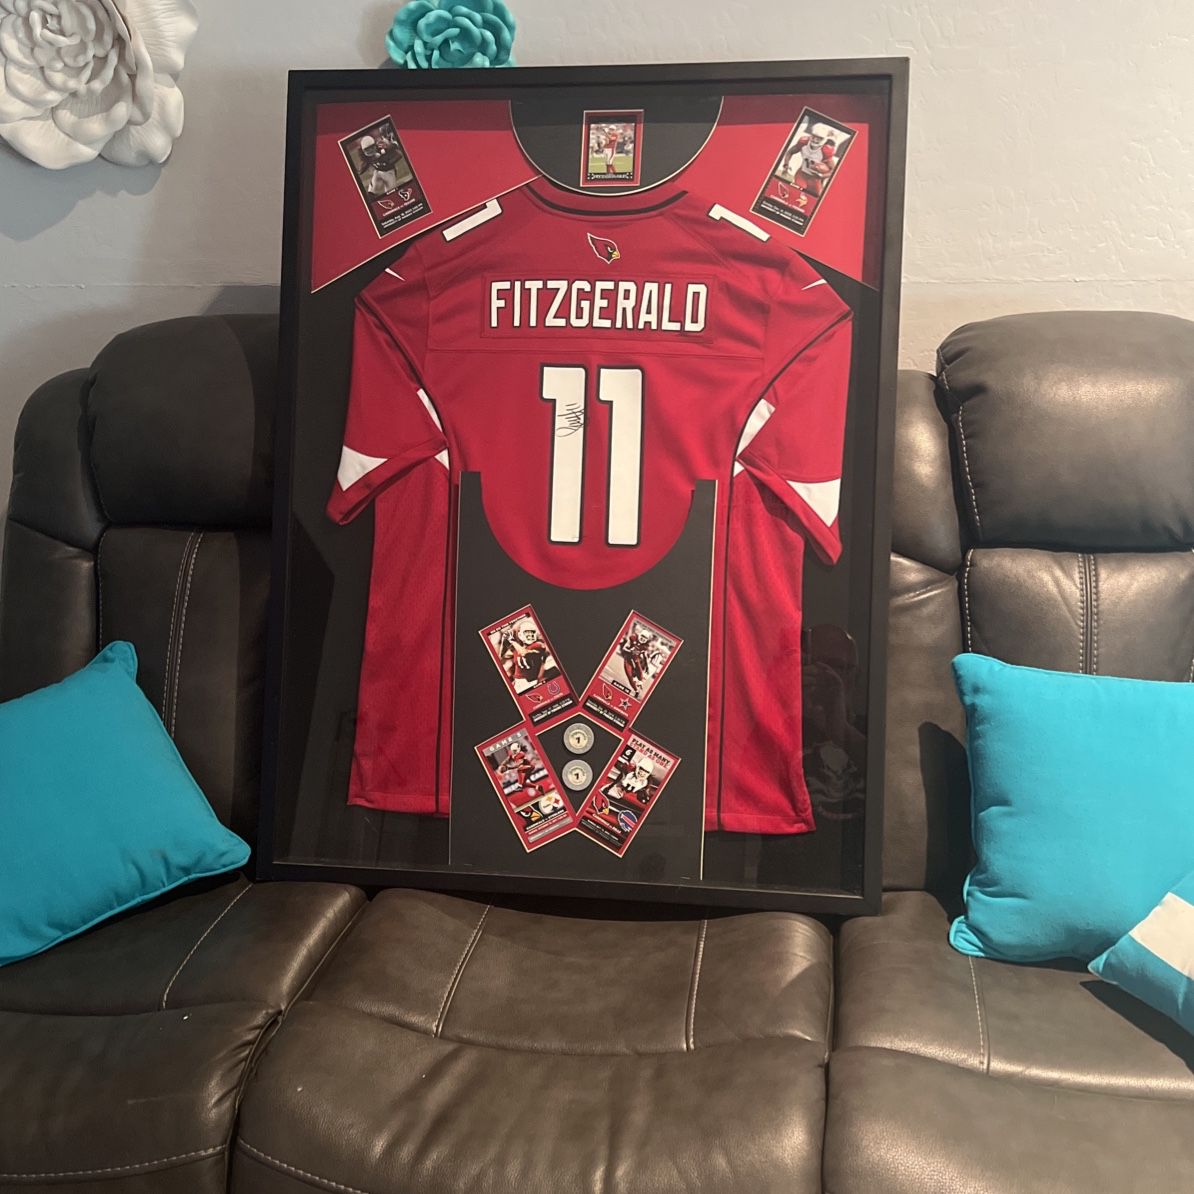 Arizona Cardinals Larry Fitzgerald Signed And Framed Jersey for